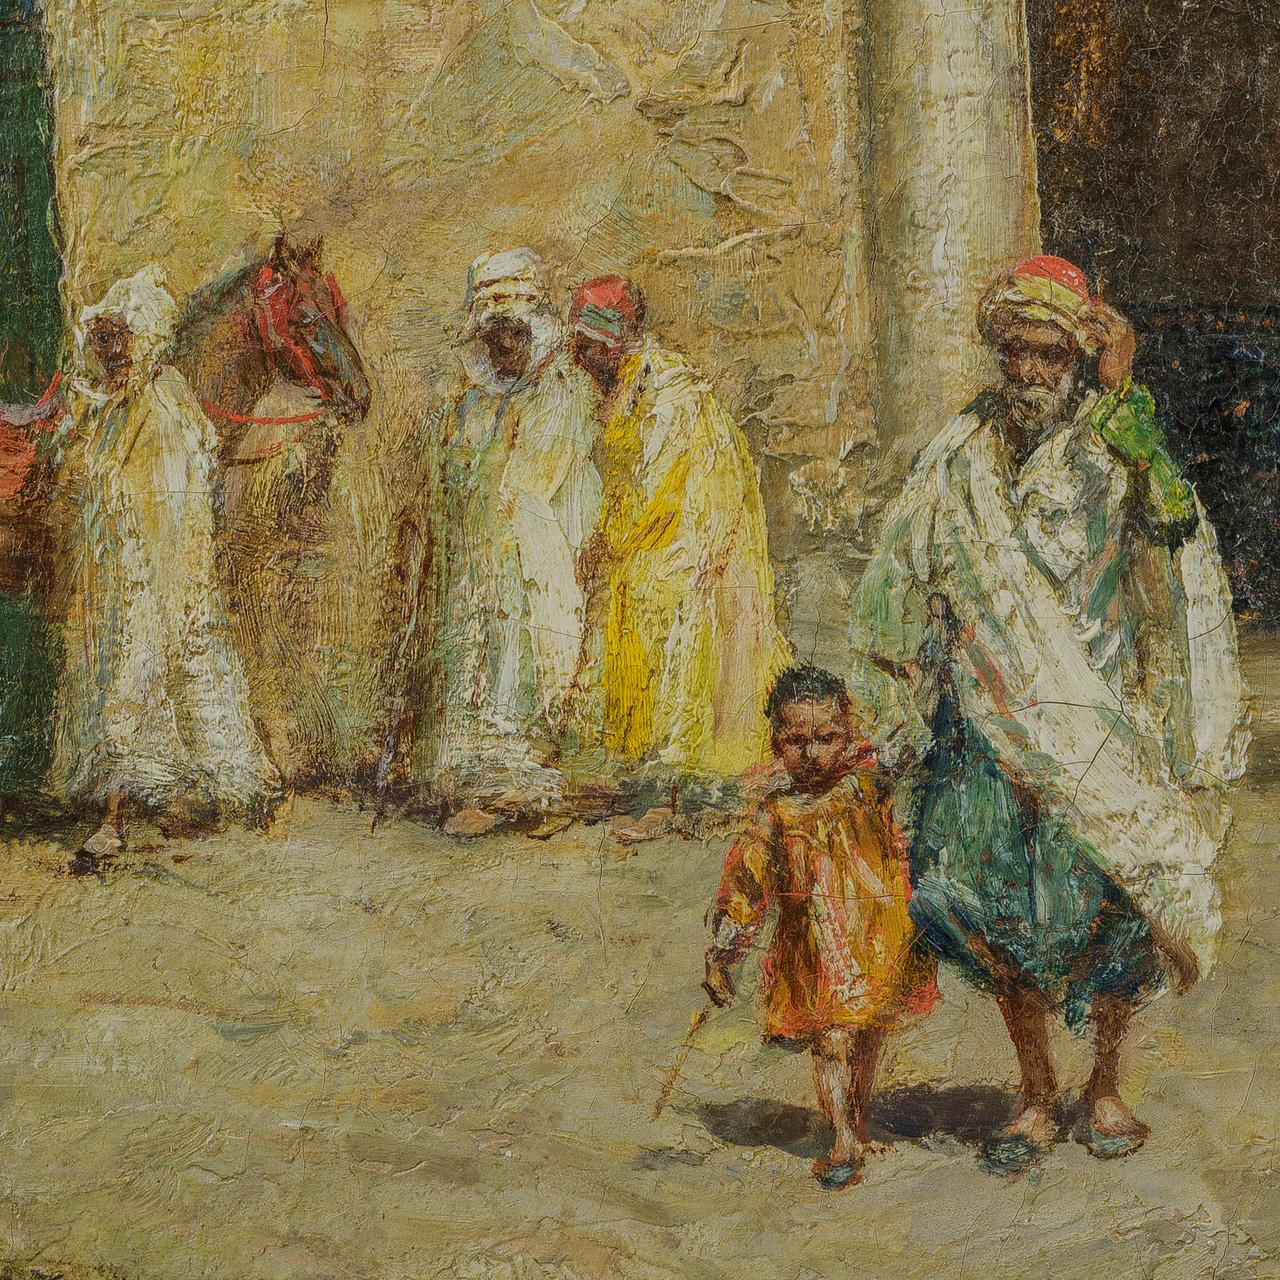 A Fine quality French Orientalist painting of a market by Addison Millar

Maker: Addison Thomas Millar (1850 - 1913)
Origin: American
Date: 19th century
Medium: Oil on canvas
Dimension: 12 in x 16 in (image); 18 1/2 in x 22 in (frame).